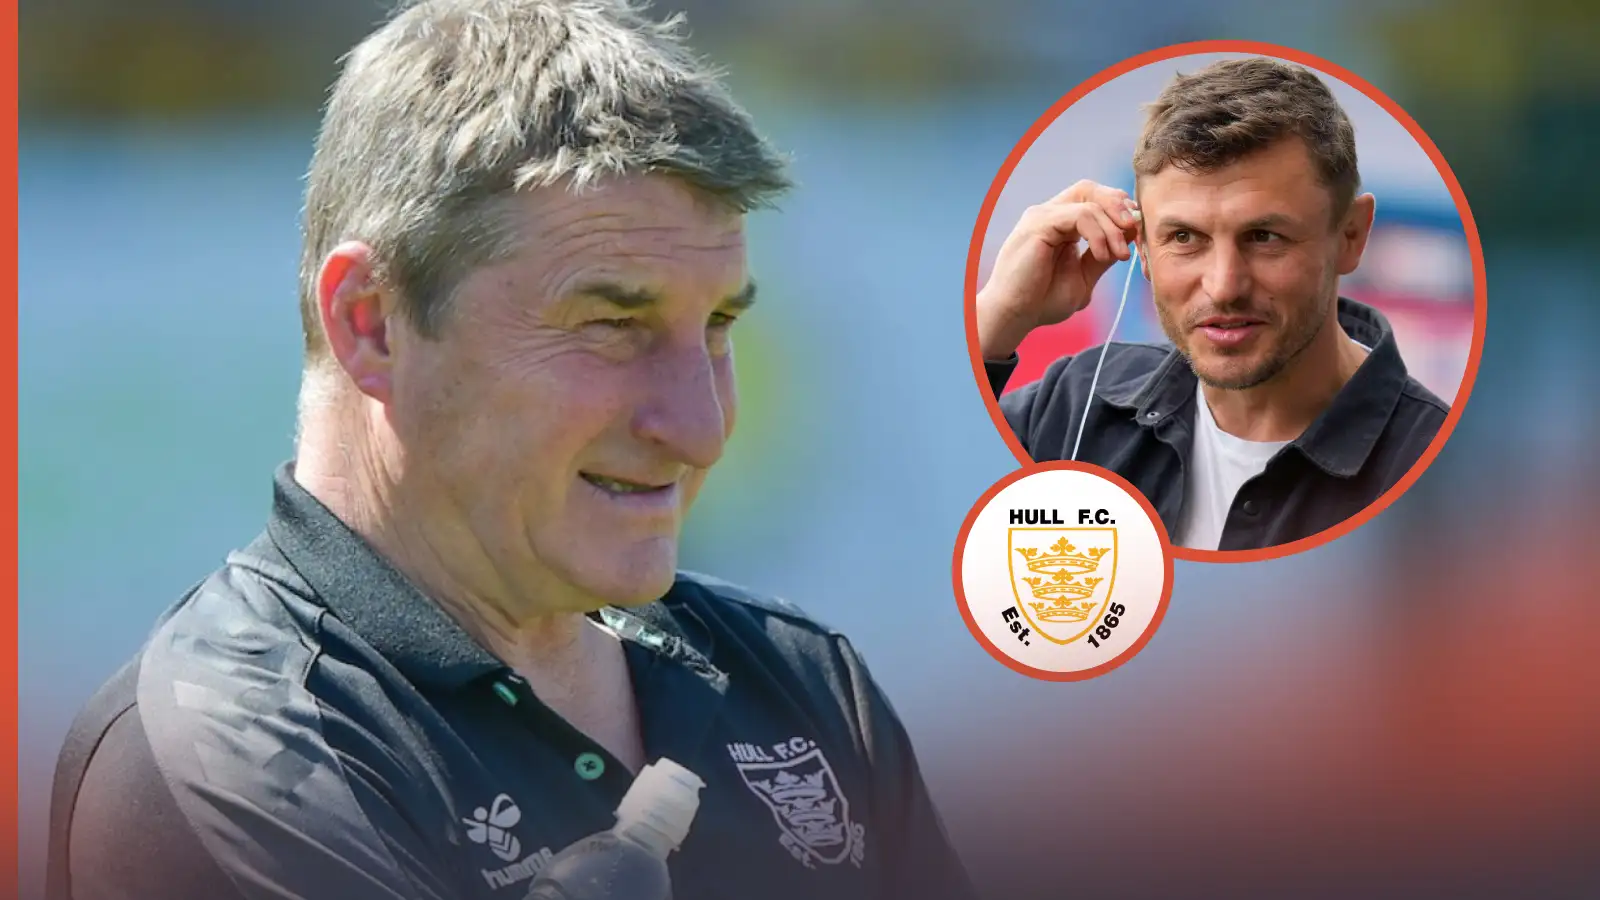 ‘Not a coaching problem’ – Jon Wilkin offers damning Hull FC verdict after Tony Smith sacking